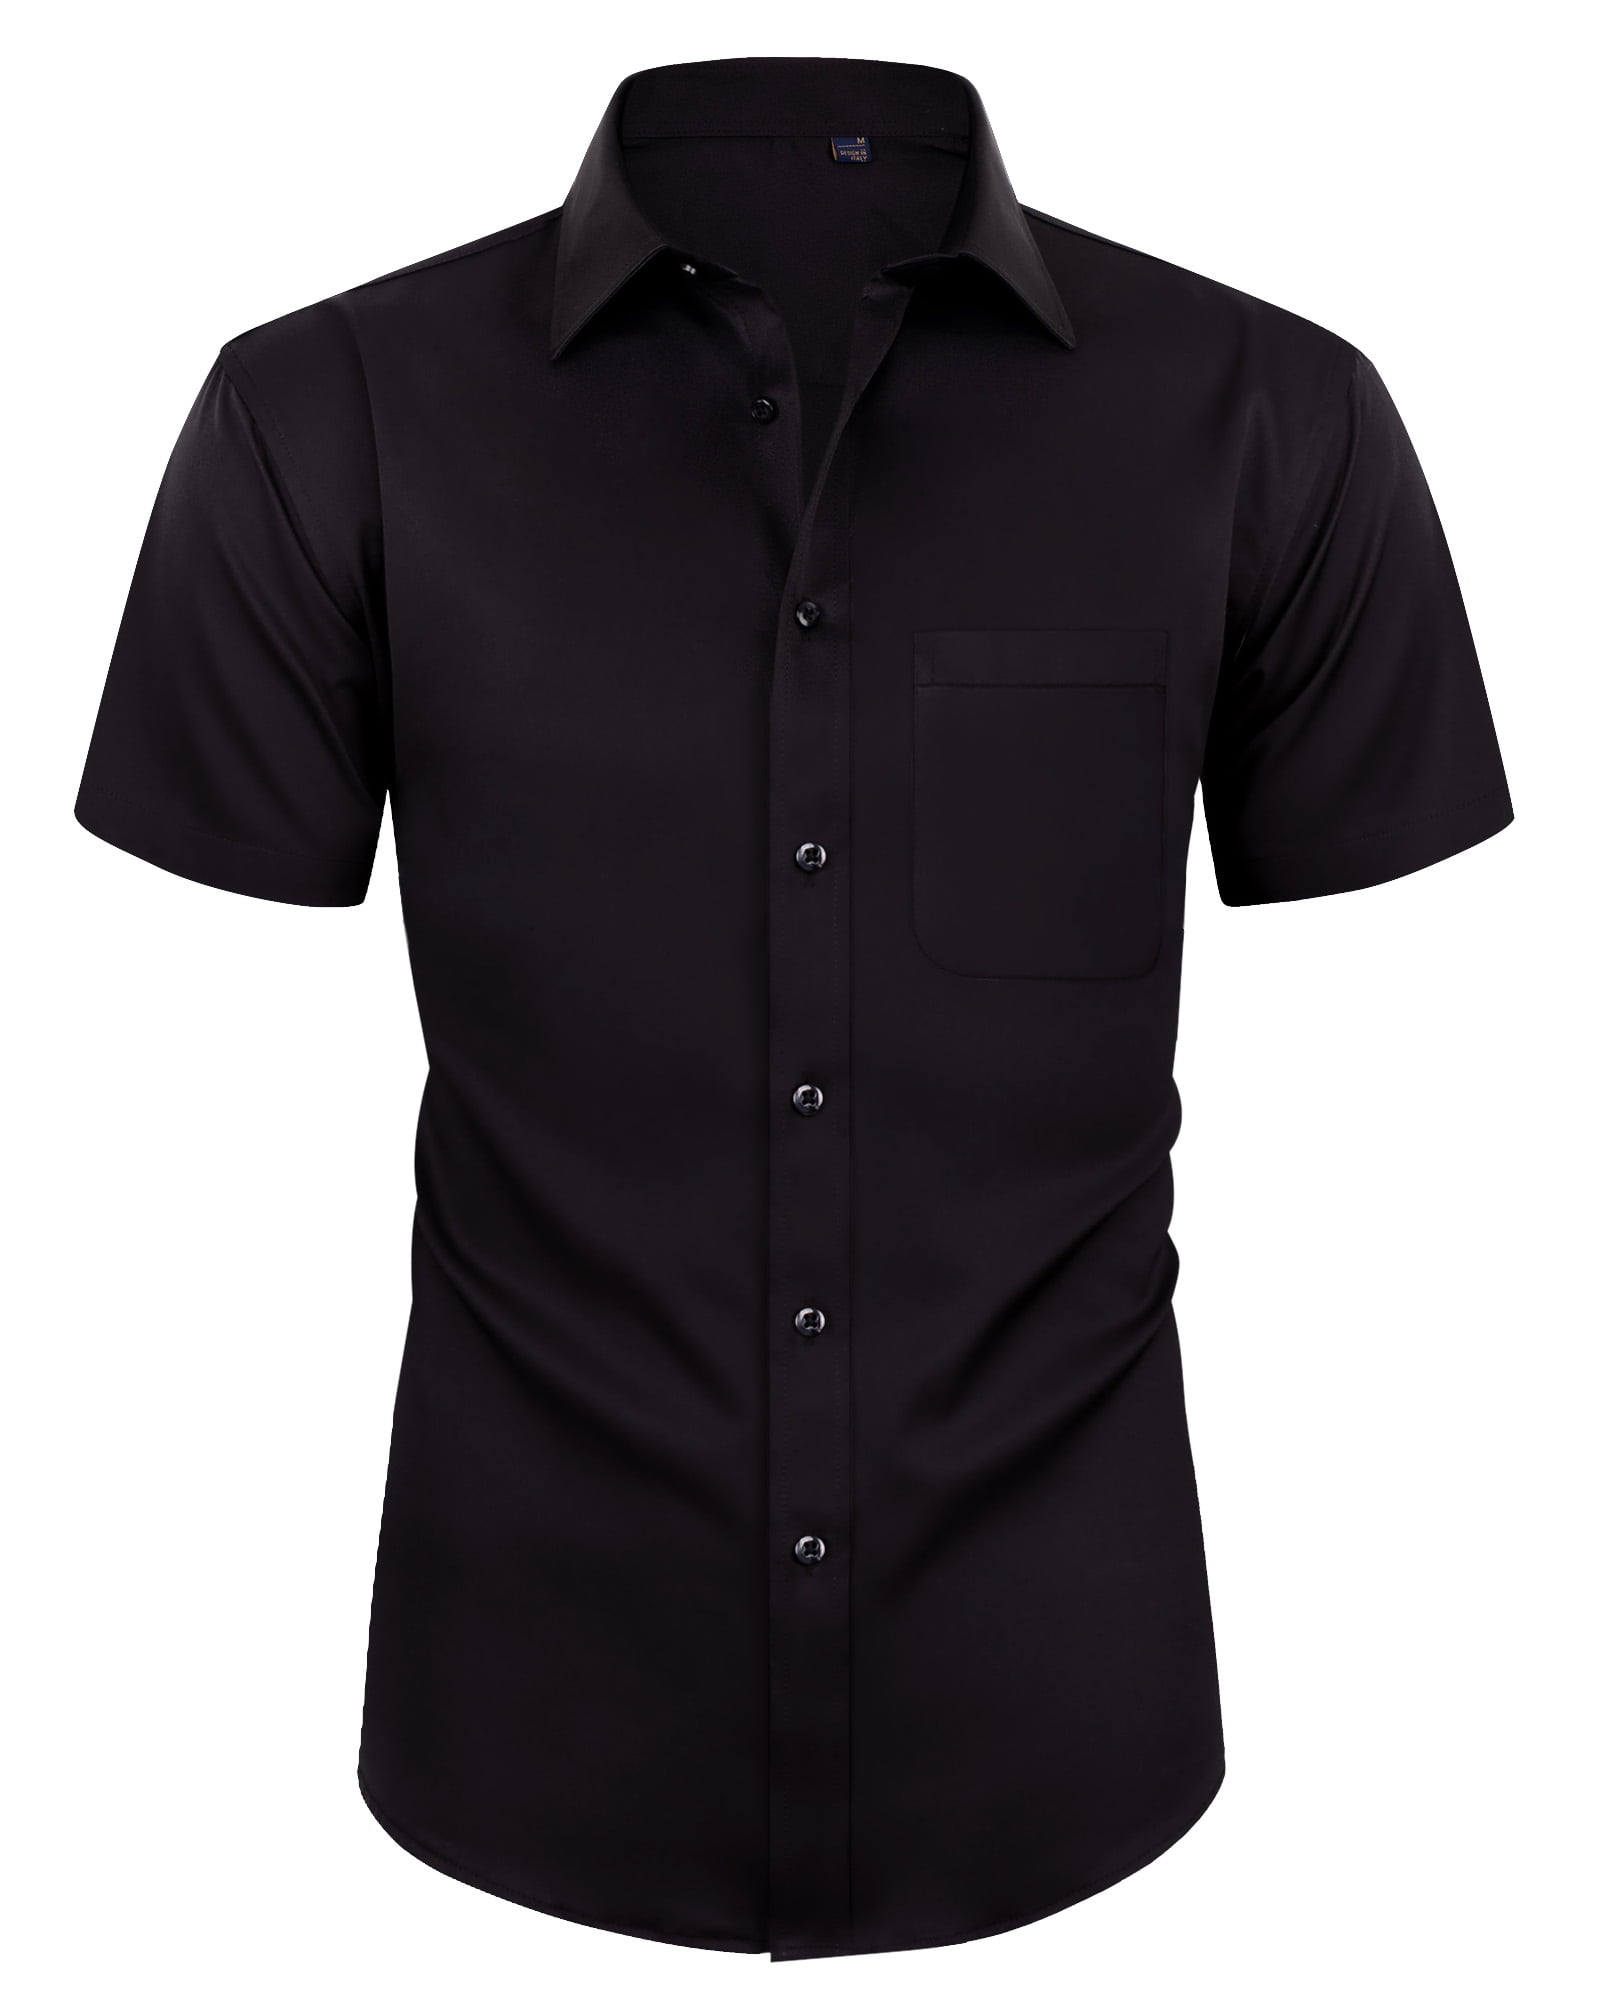 Alimens & Gentle Short Sleeve Dress Shirts for Men Stretch Casual ...